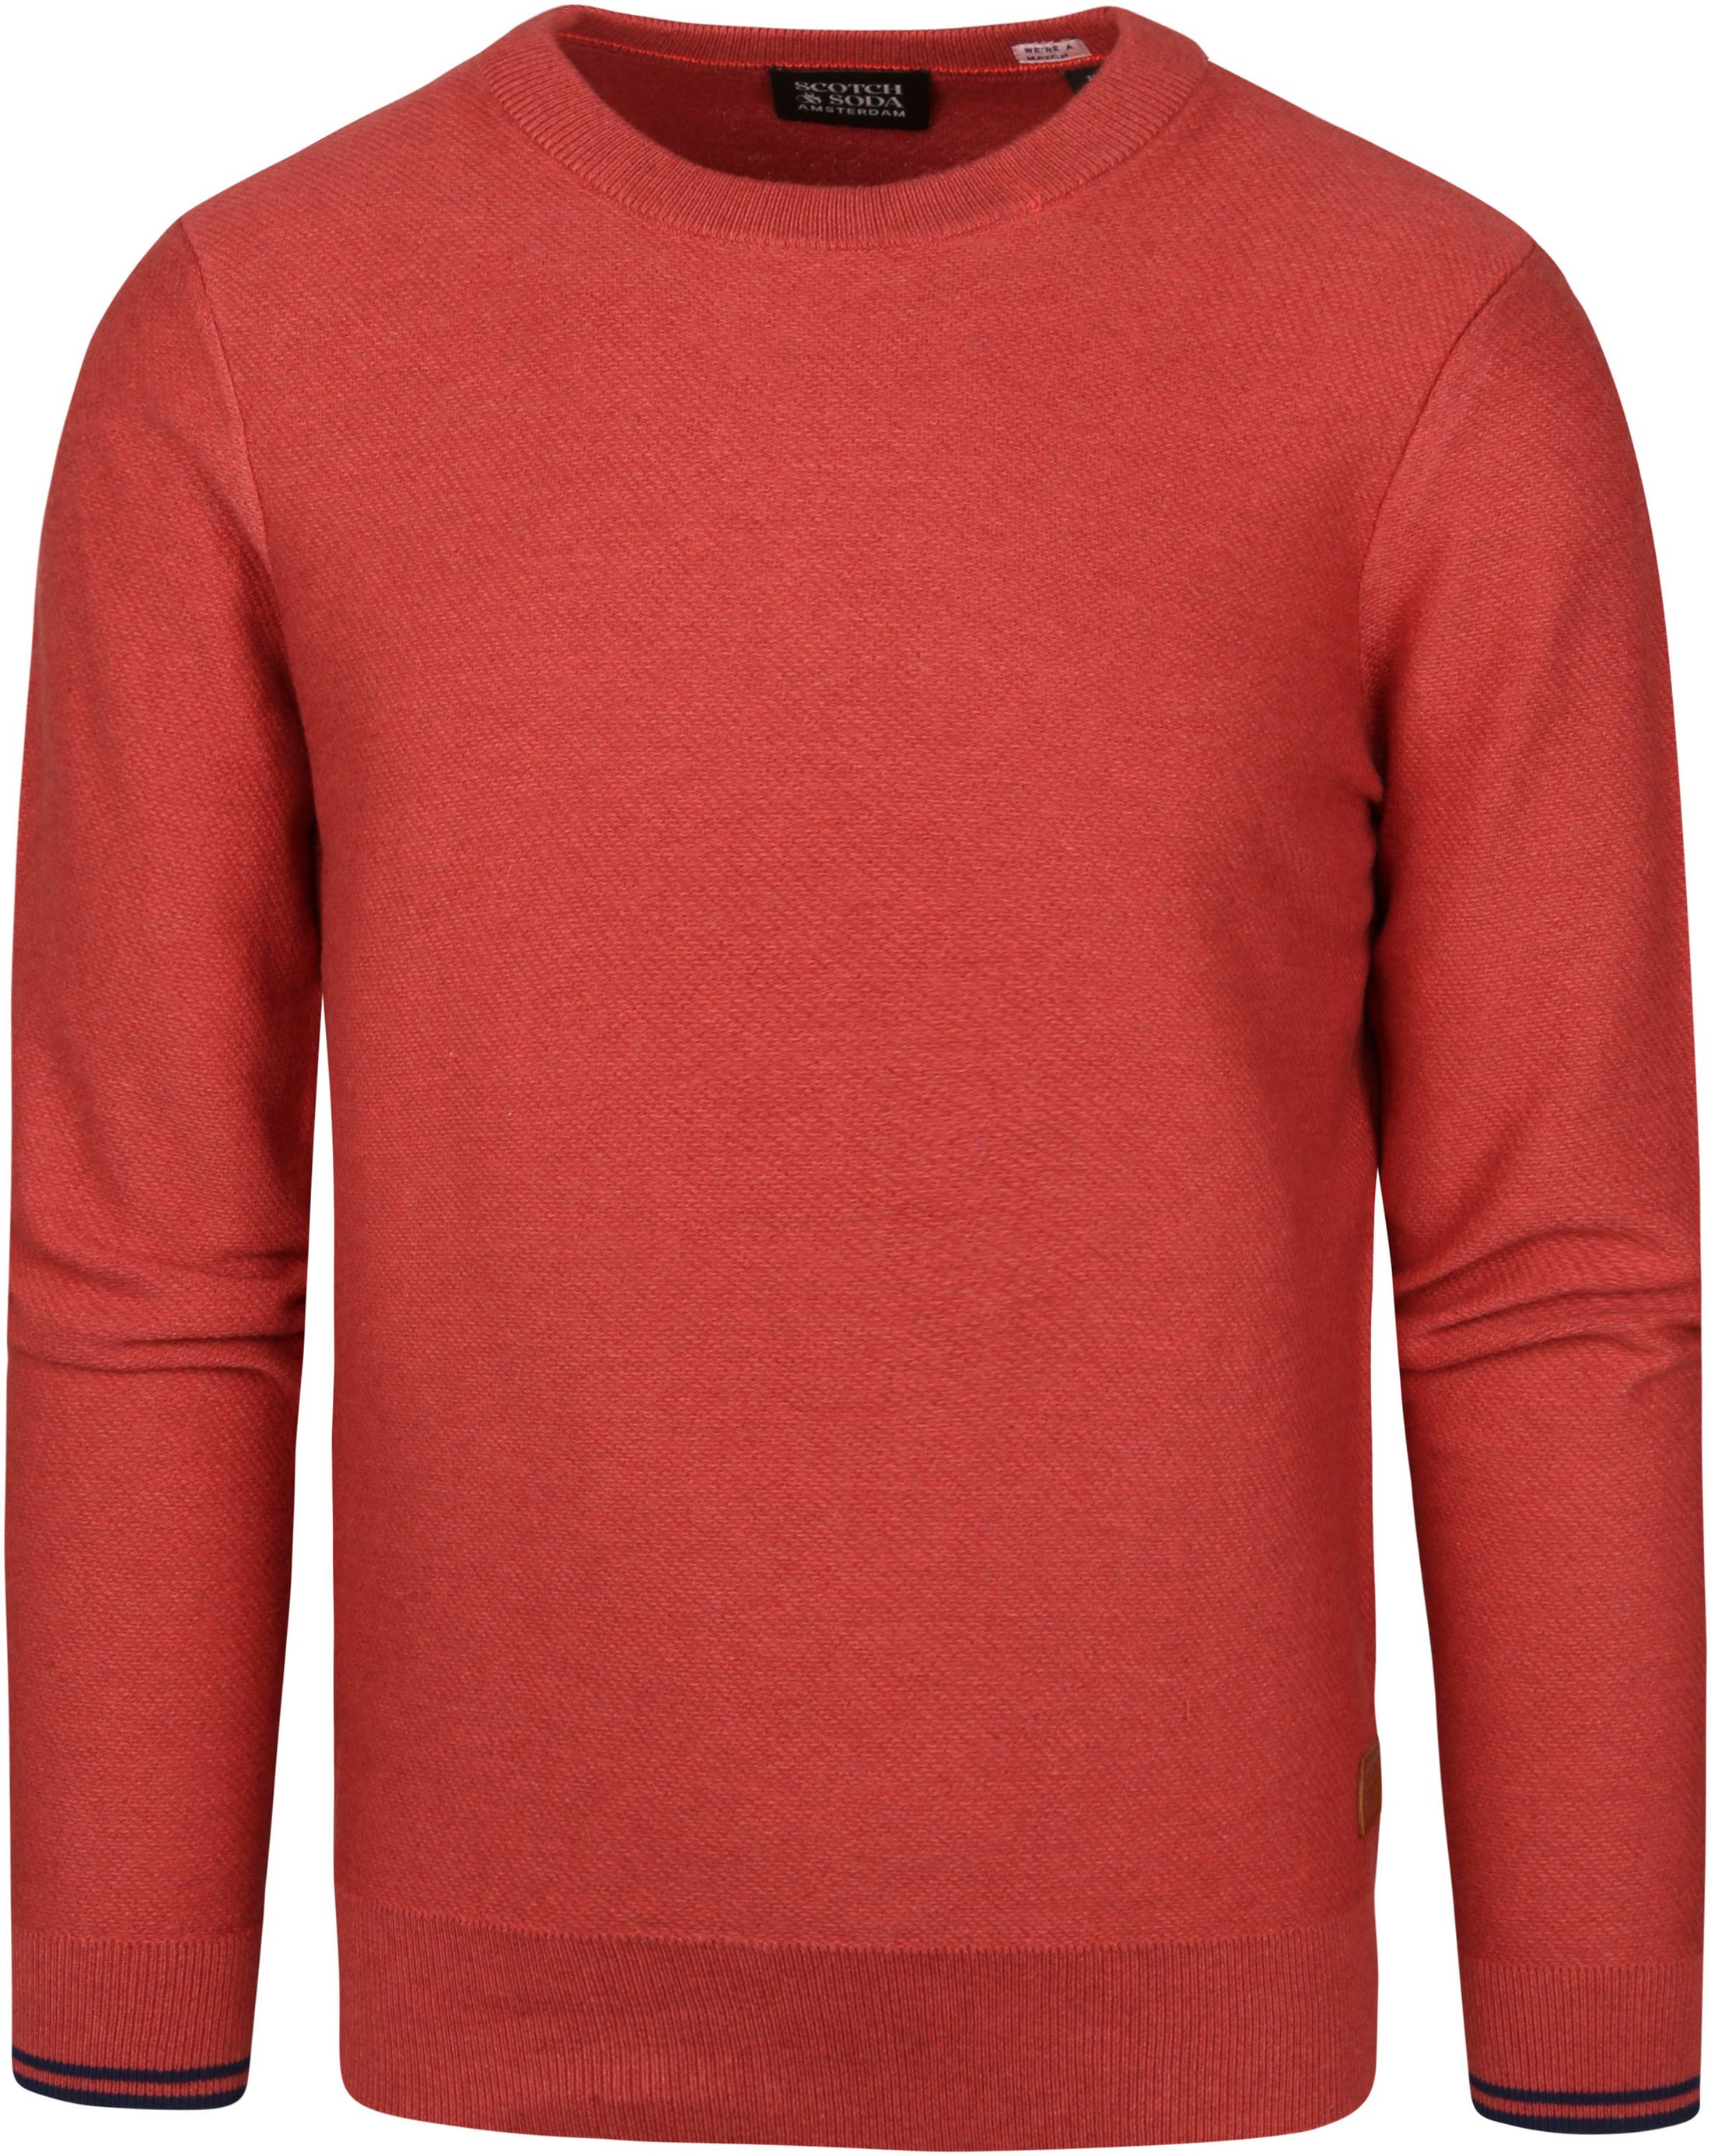 Scotch and Soda Sweater Wool Red size L